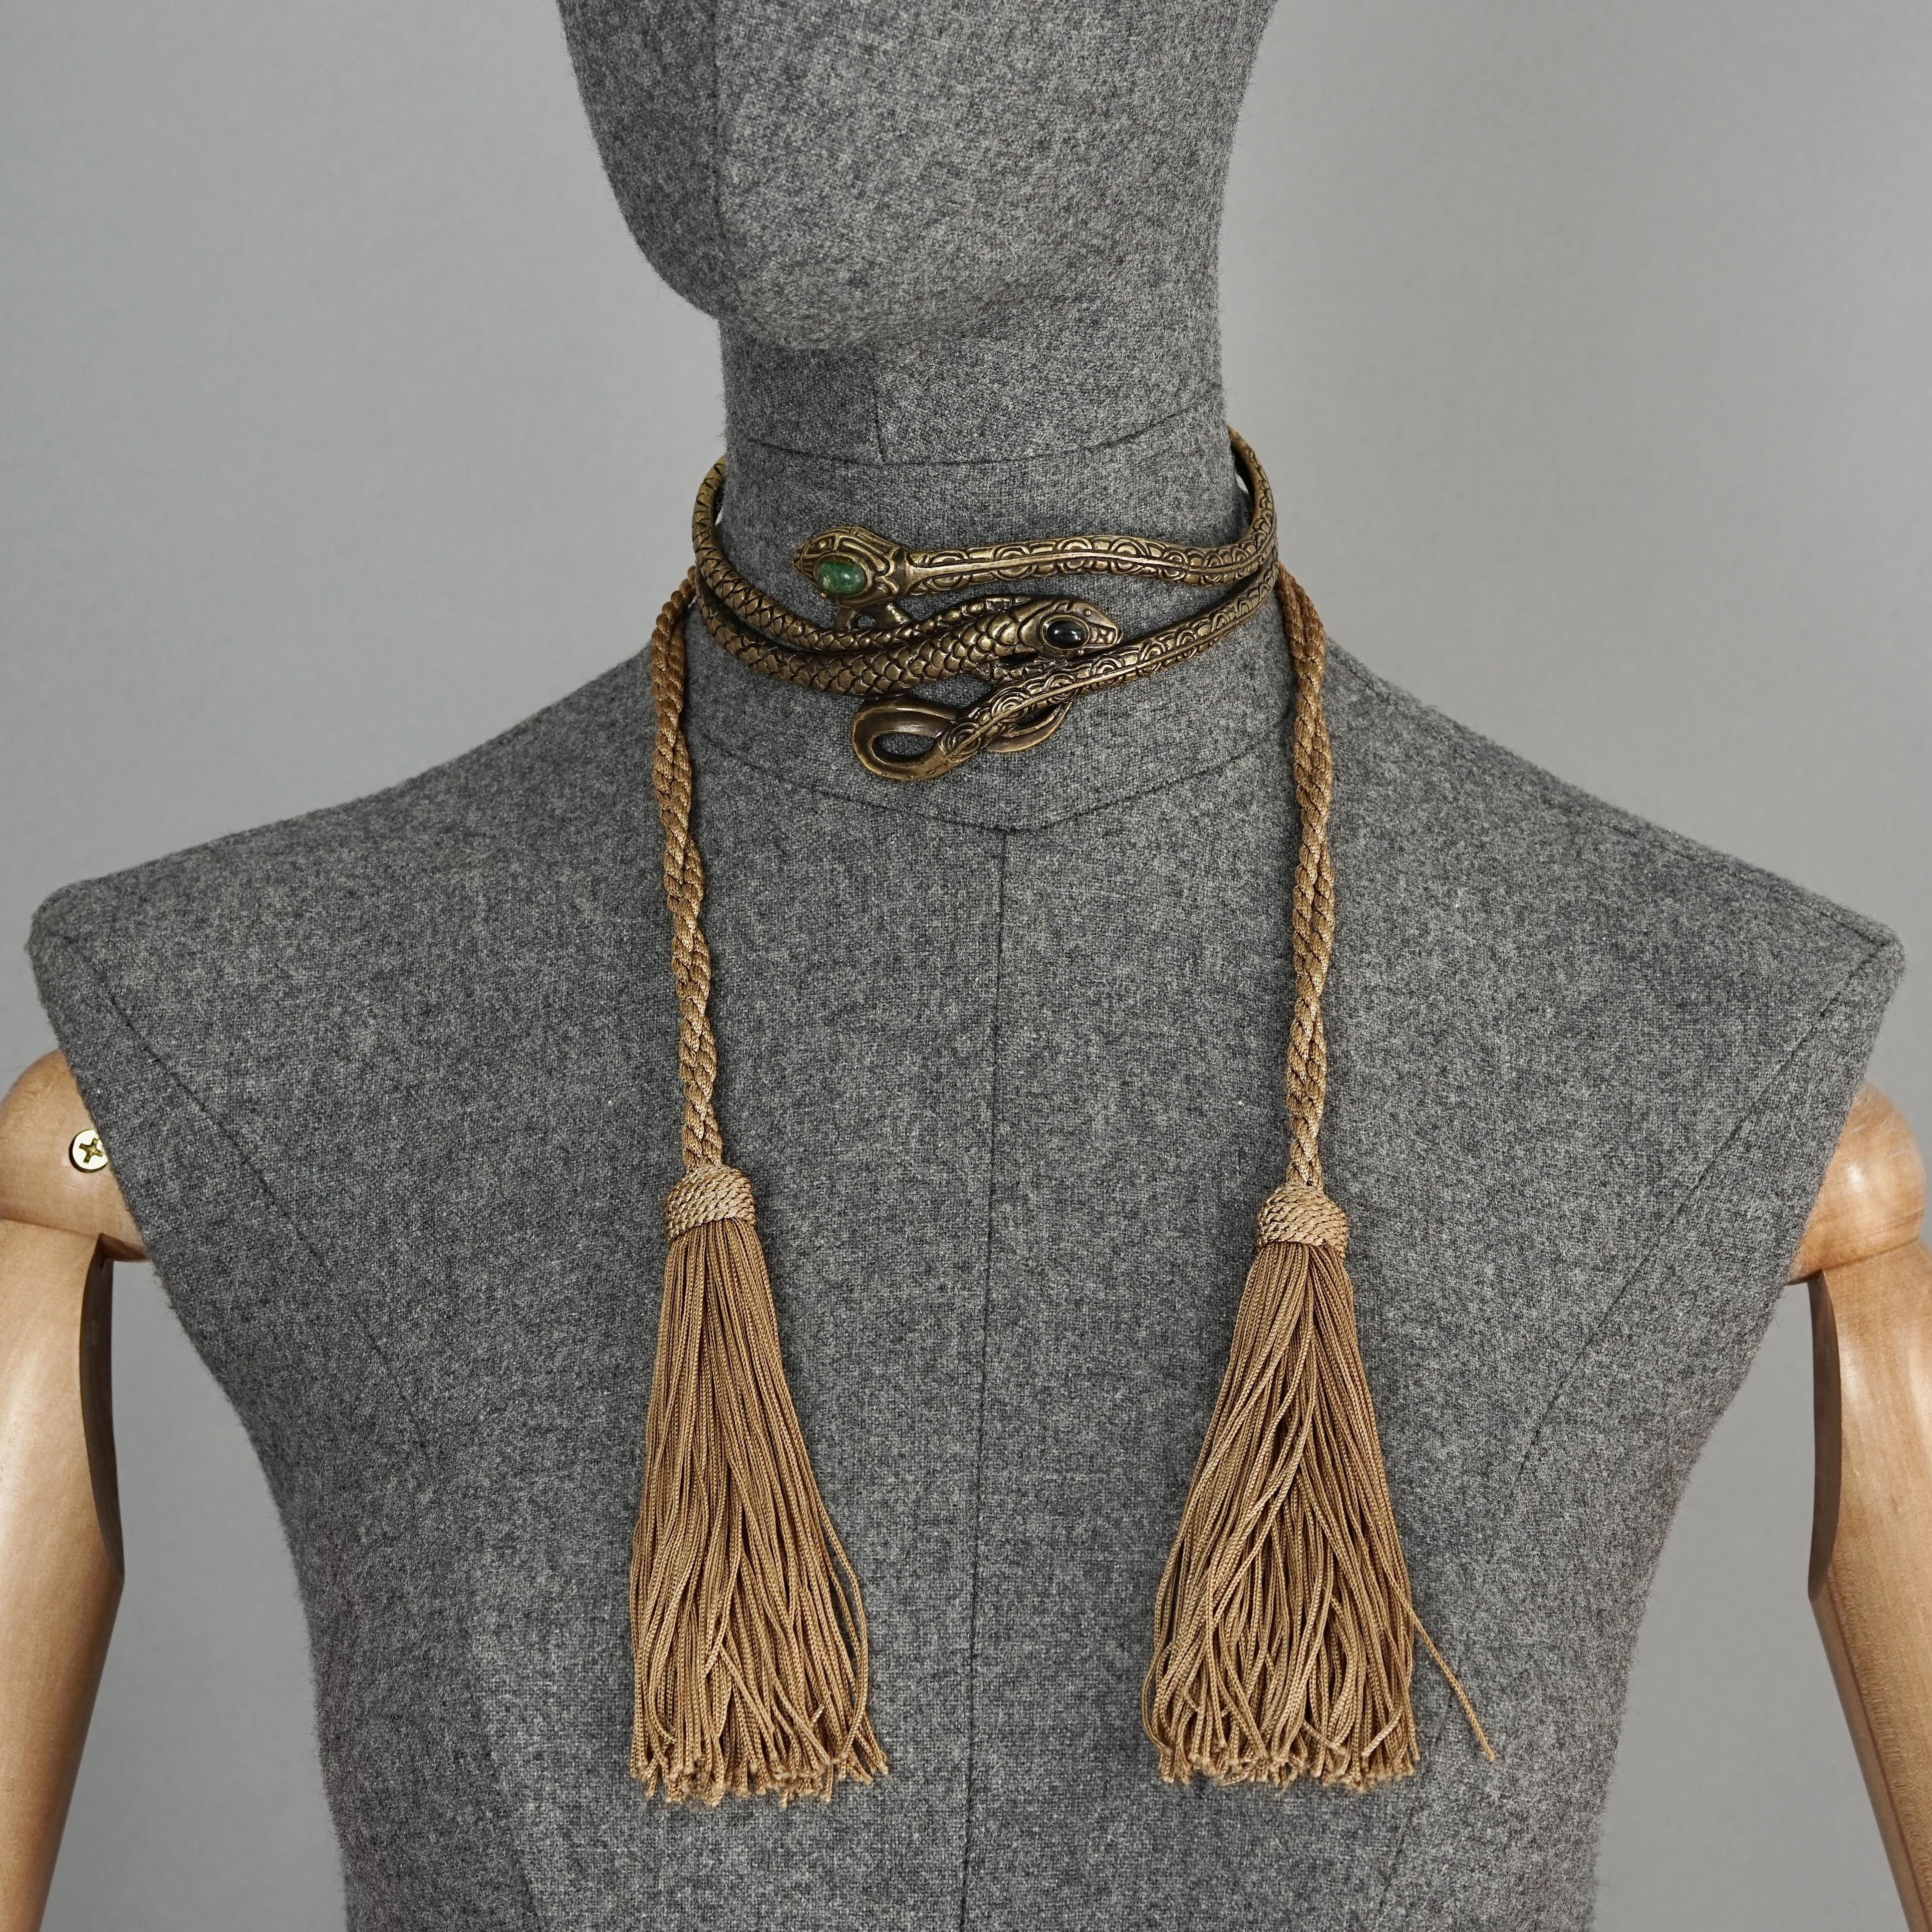 Vintage VALENTINO GARAVANI Snake Tassel Choker Necklace

Measurements:
Height: 2 inches (5.1 cm)
Tassels: 11.81 inches (30 cm)
Chain: 13.07 inches (33.2 cm) could be adjusted a little bit (+/-)

Features:
- 100% Authentic VALENTINO.
- Impressive